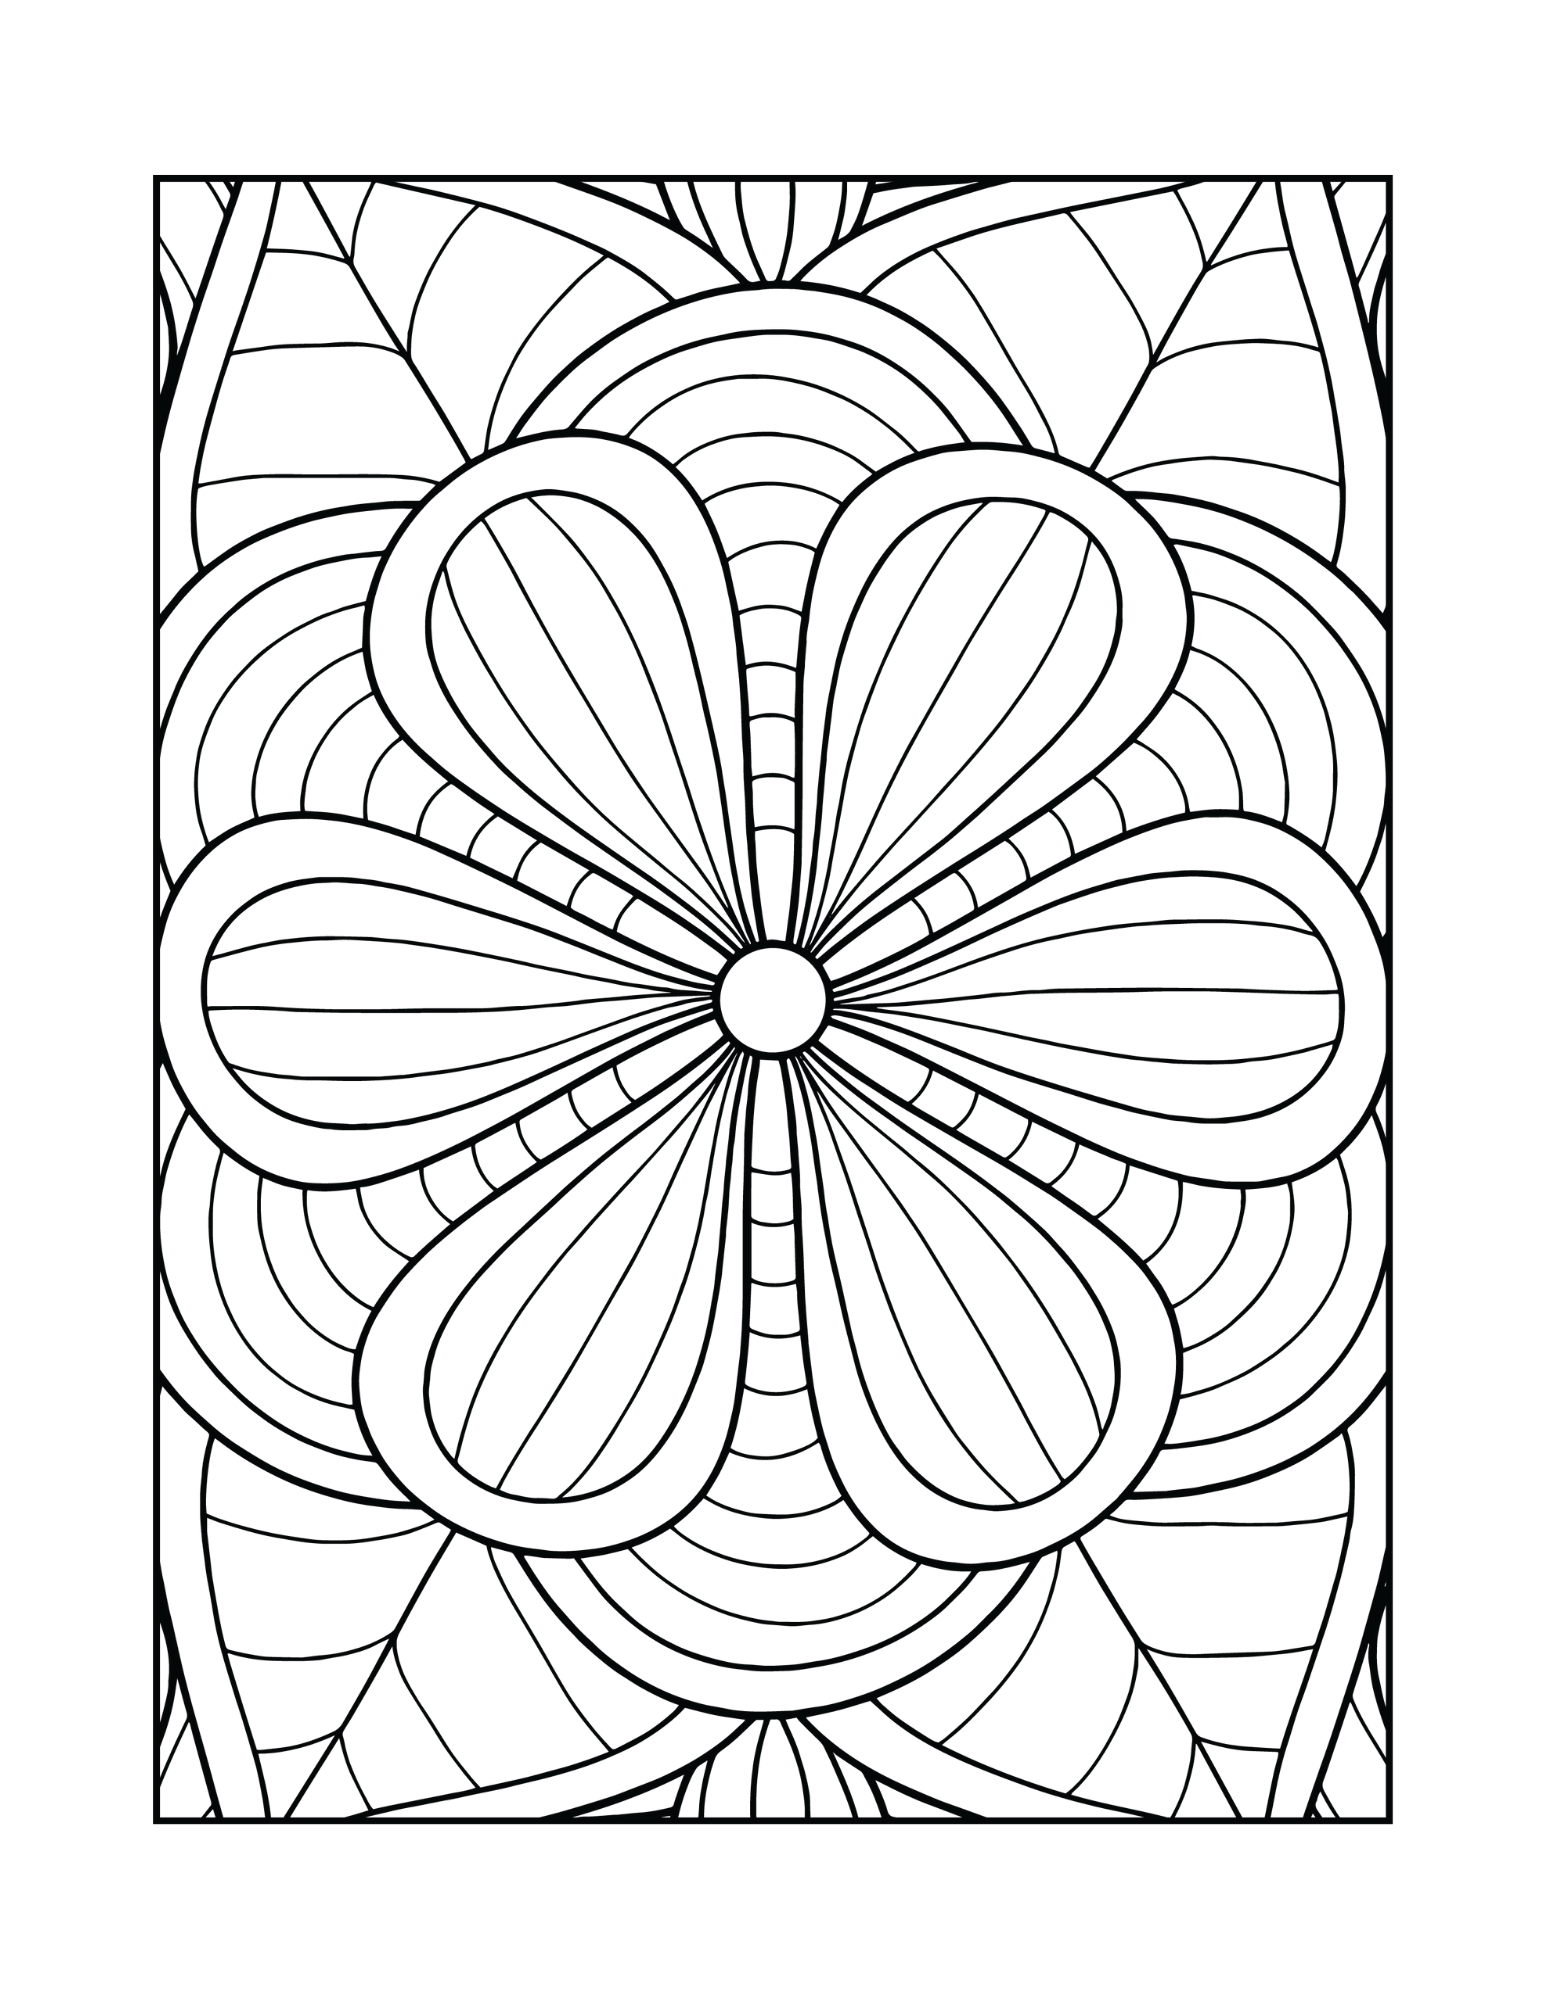 Mandalas Coloring Book - Coloring Pages to Relax - Apiau Microsoft